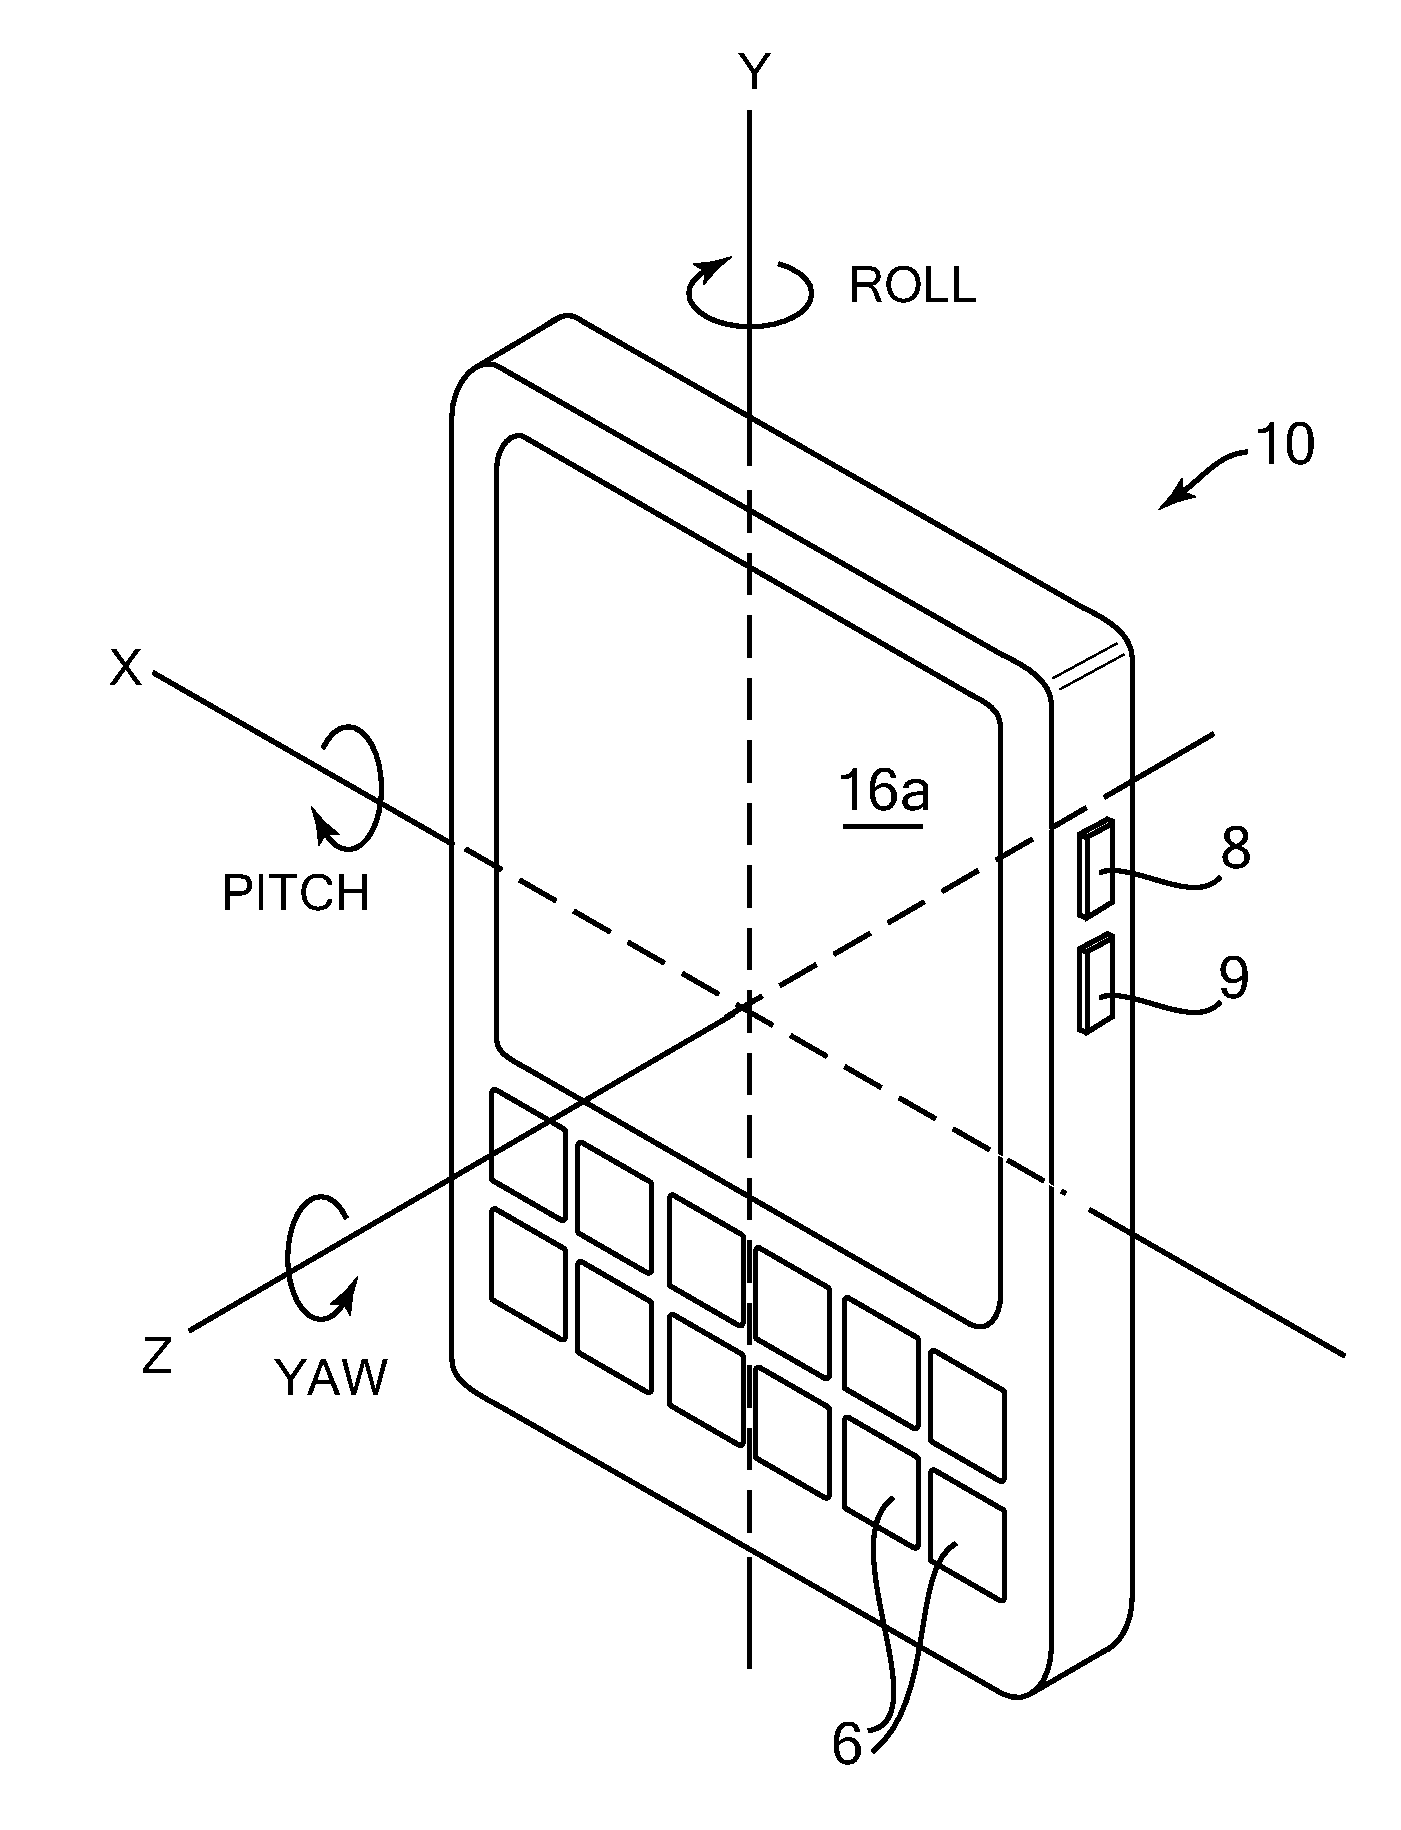 Controlling and accessing content using motion processing on mobile devices